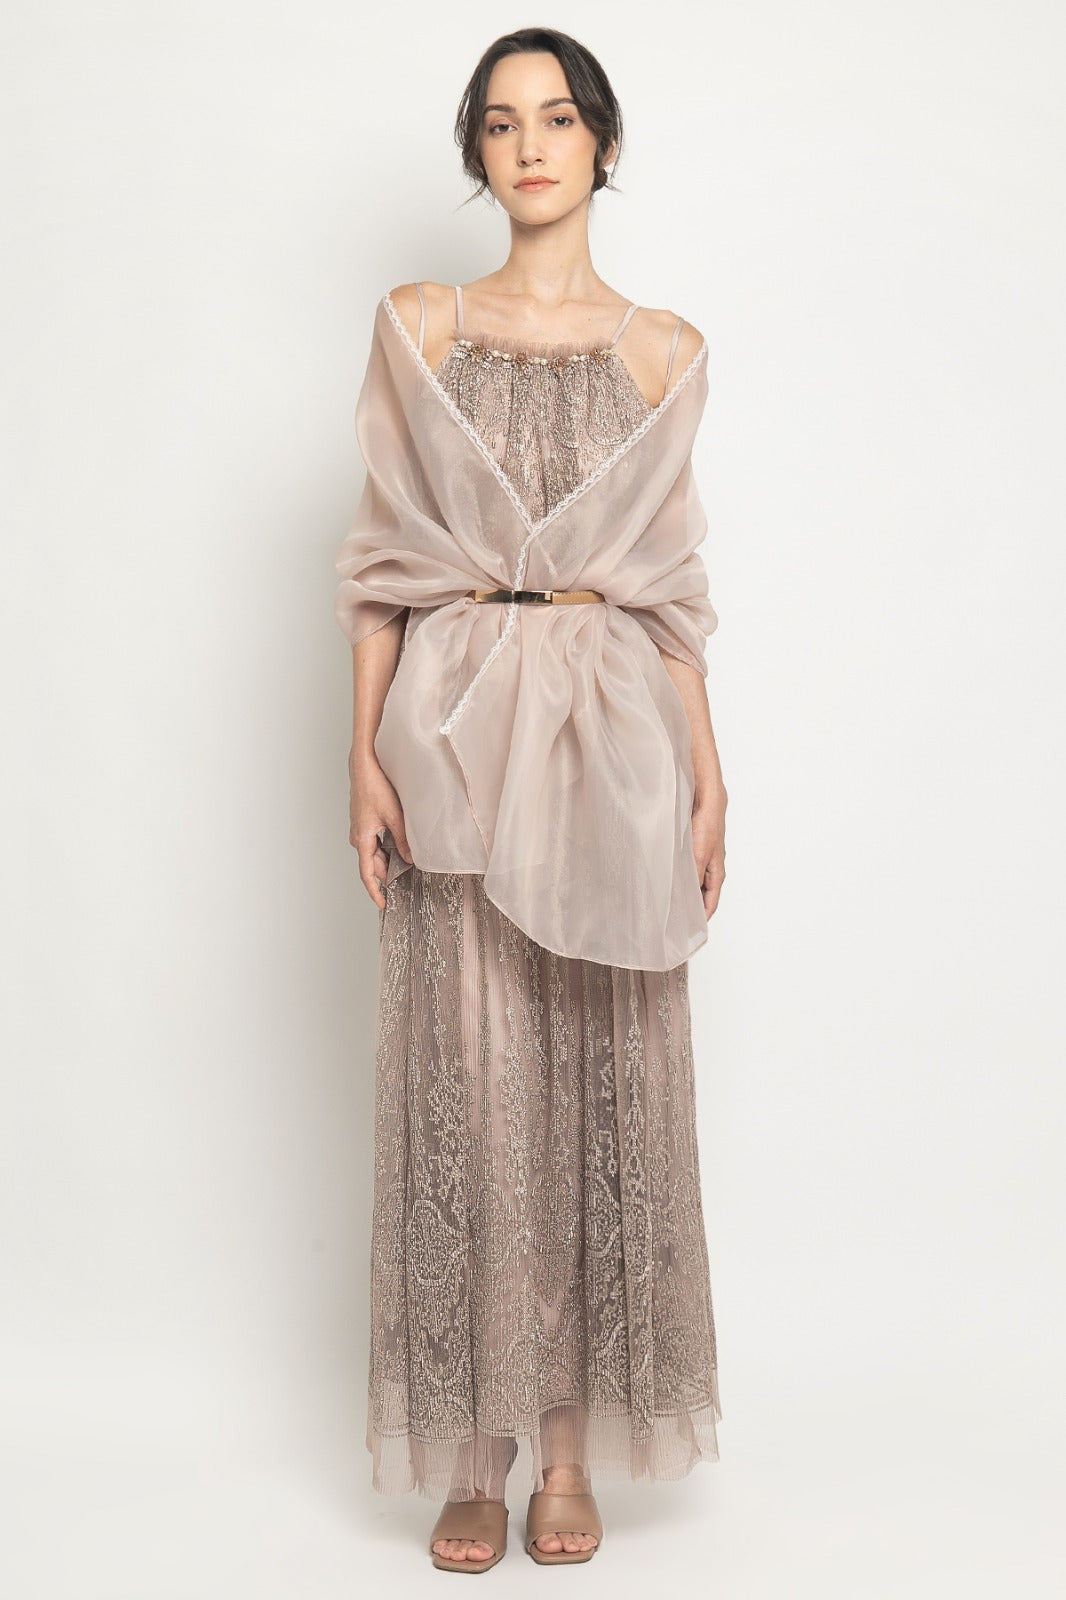 Venice Dress In Taupe (1 LEFT)